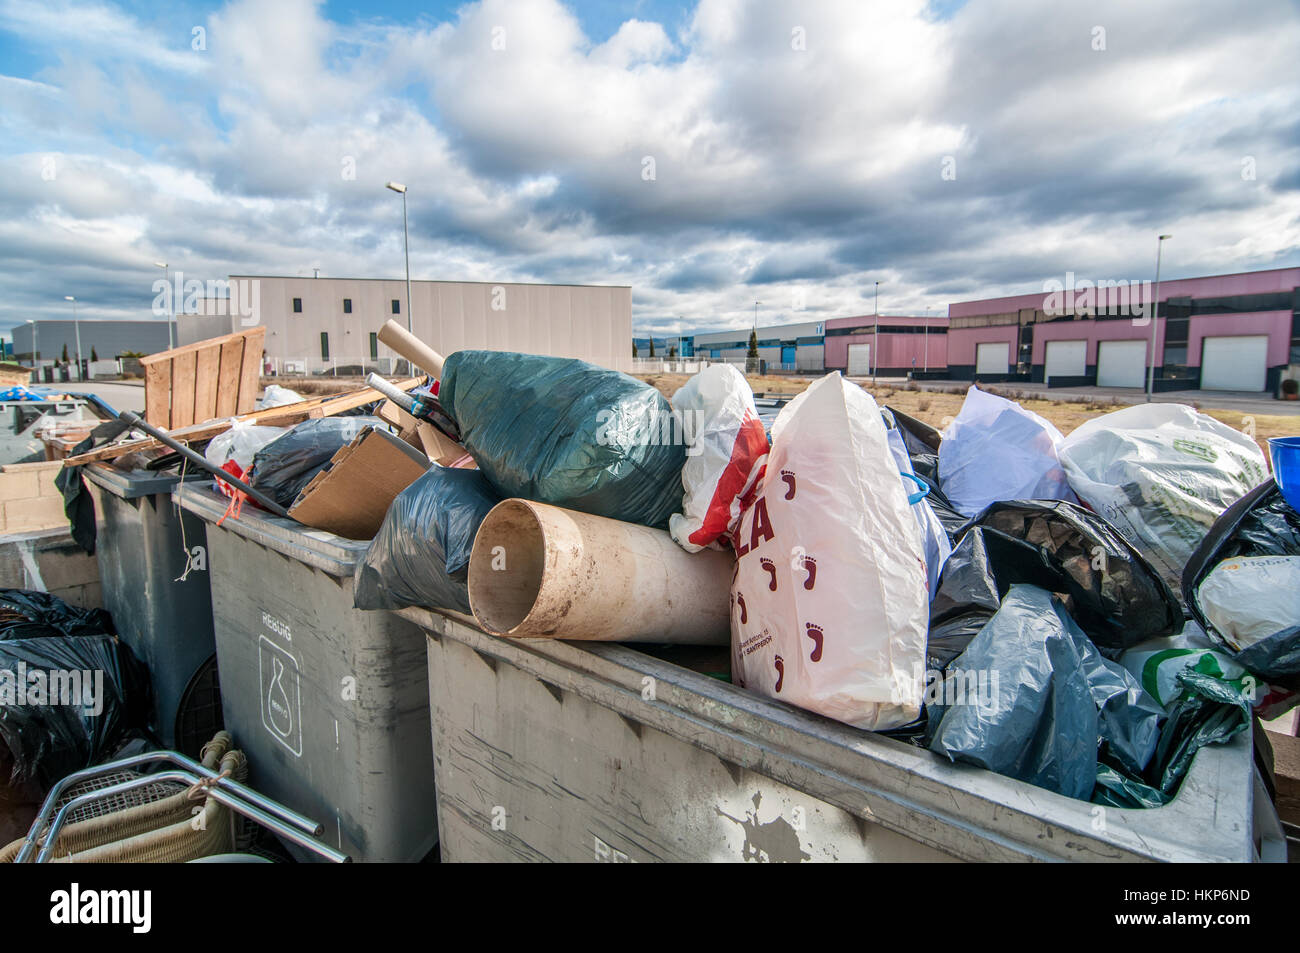 https://c8.alamy.com/comp/HKP6ND/trash-in-the-container-in-an-industrial-zone-santpedor-barcelona-catalonia-HKP6ND.jpg